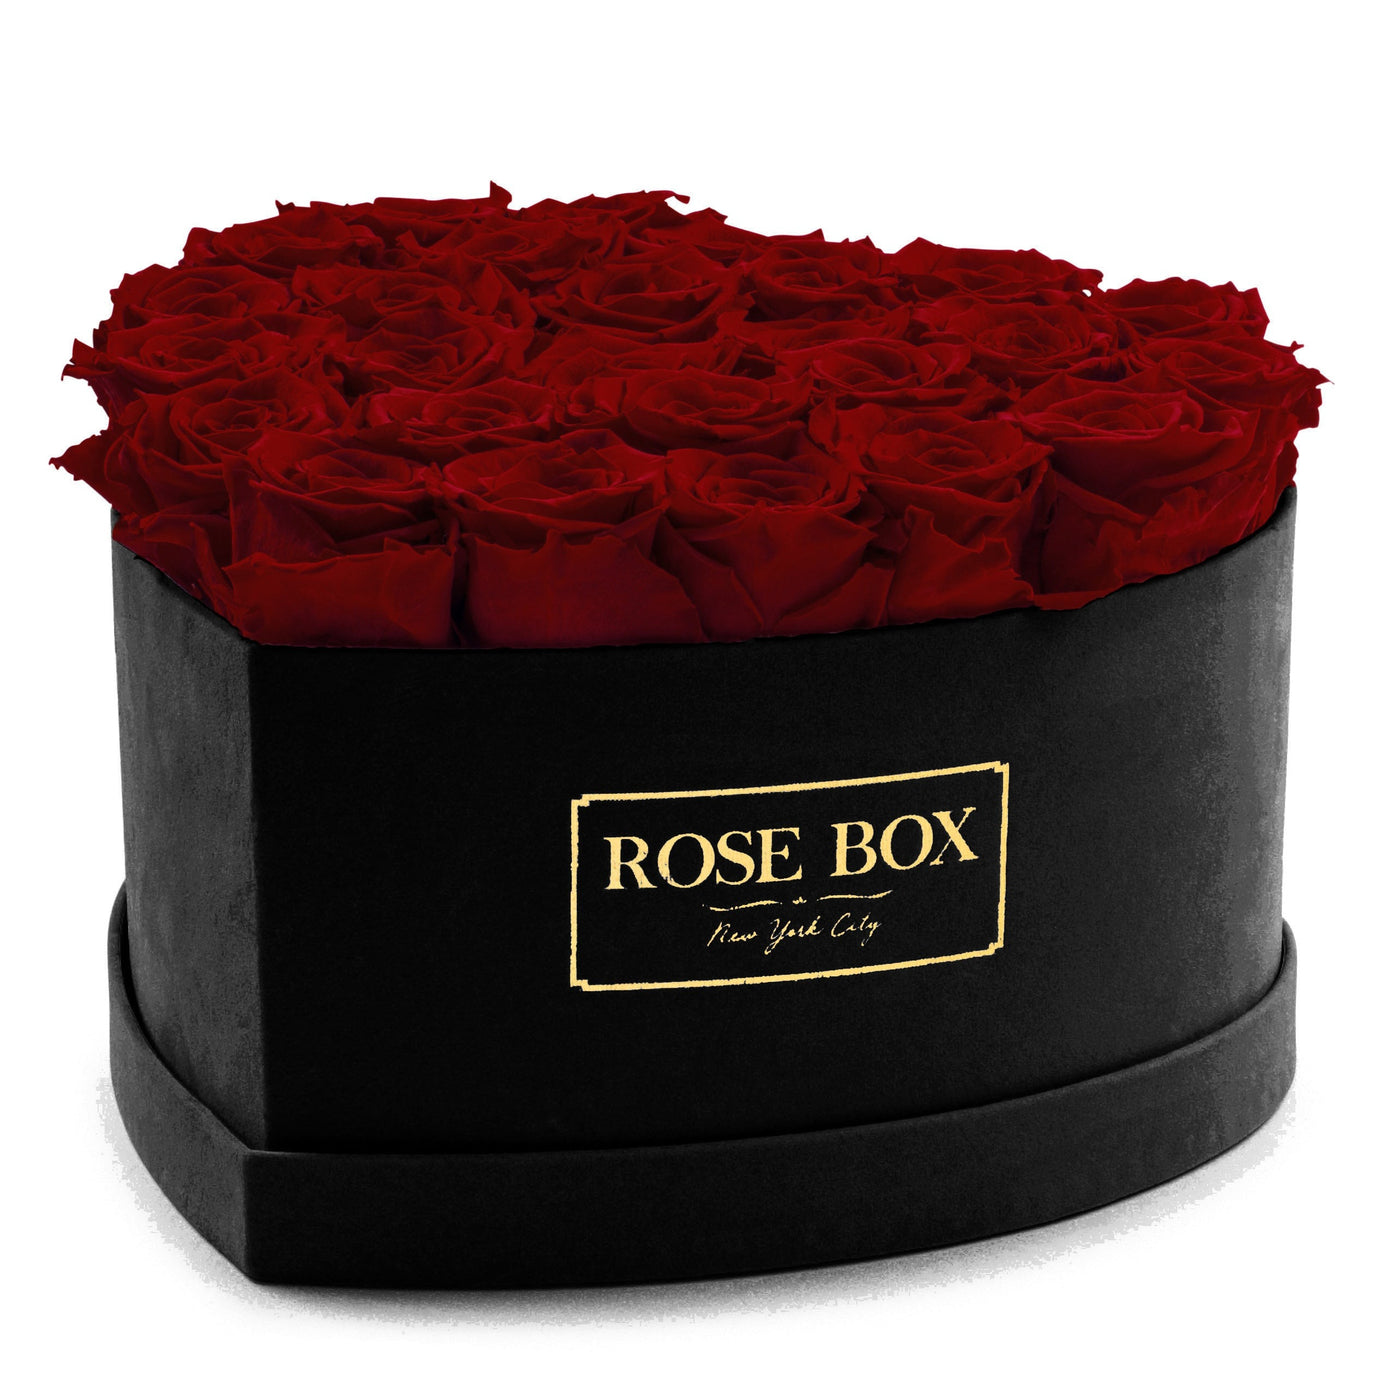 Large Black Heart Box with Red Wine Roses